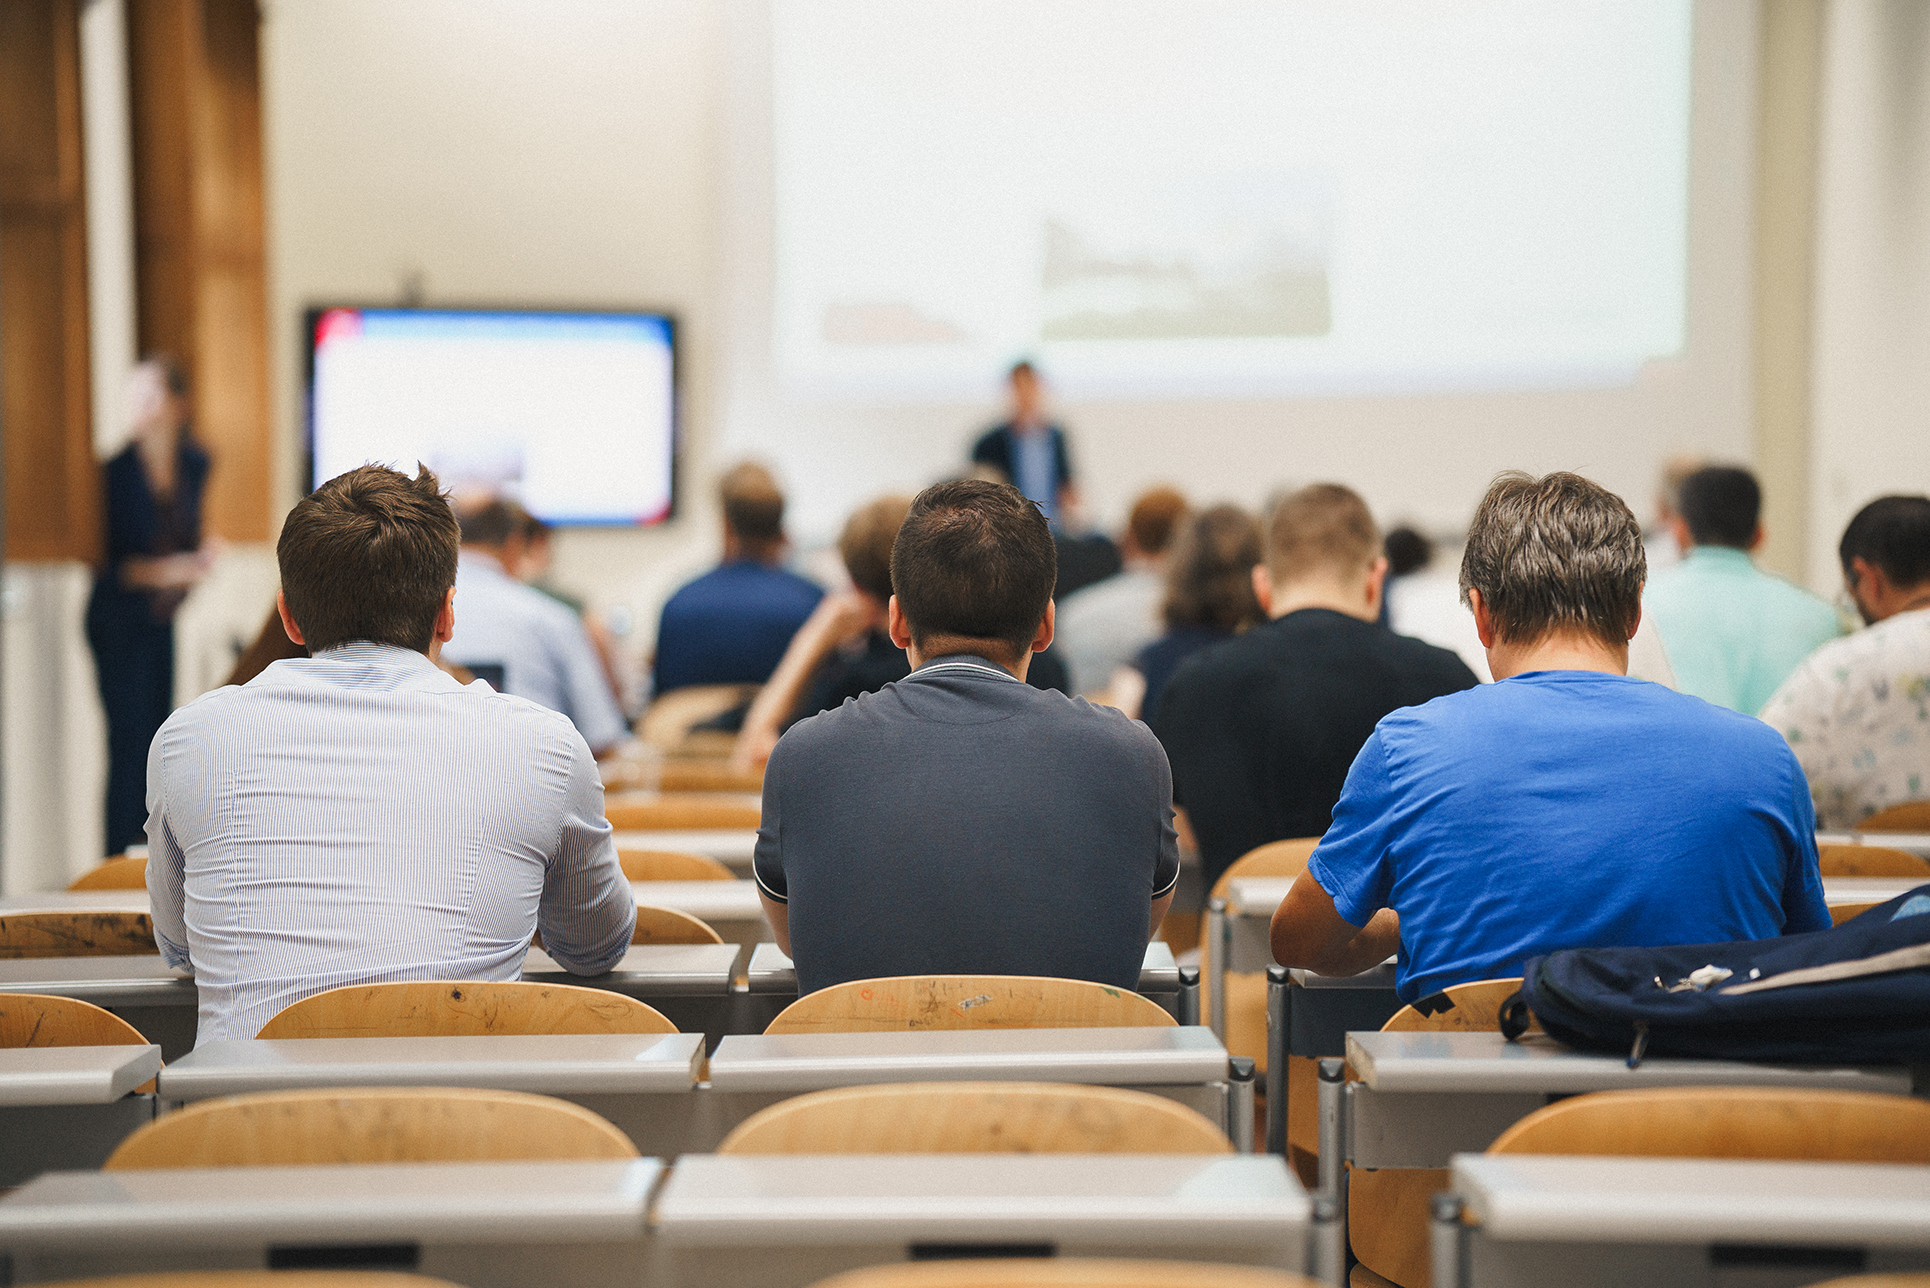 A diverse group of individuals attentively seated in a lecture hall, engaged in a learning session.